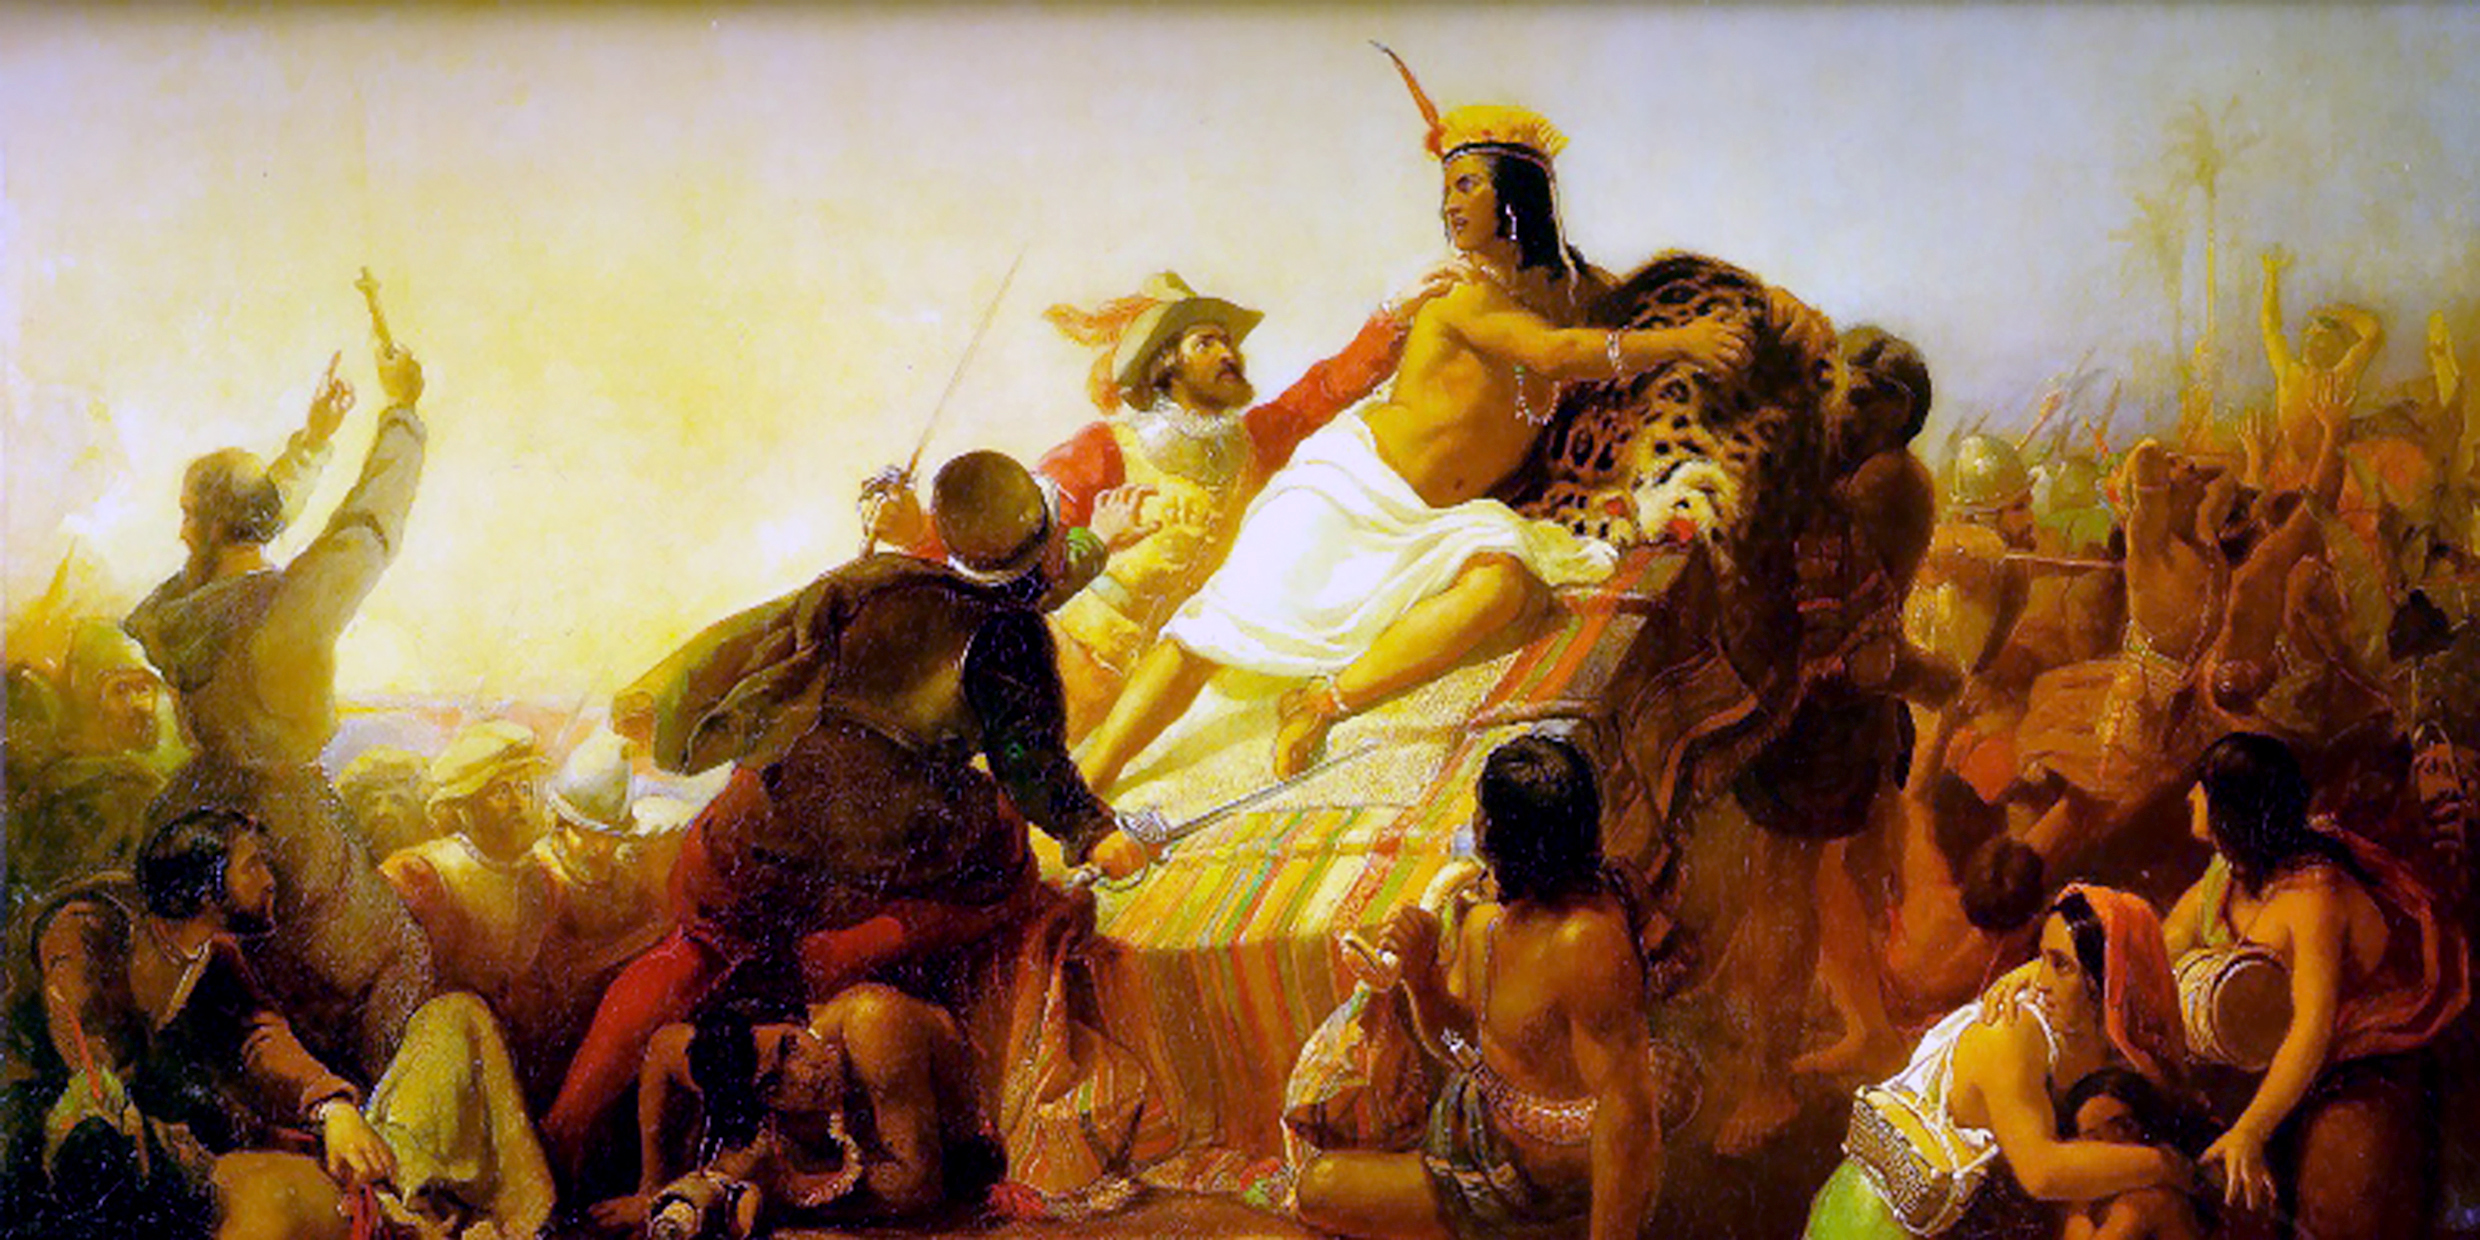 Painting of conquistadors pillaging the Inca